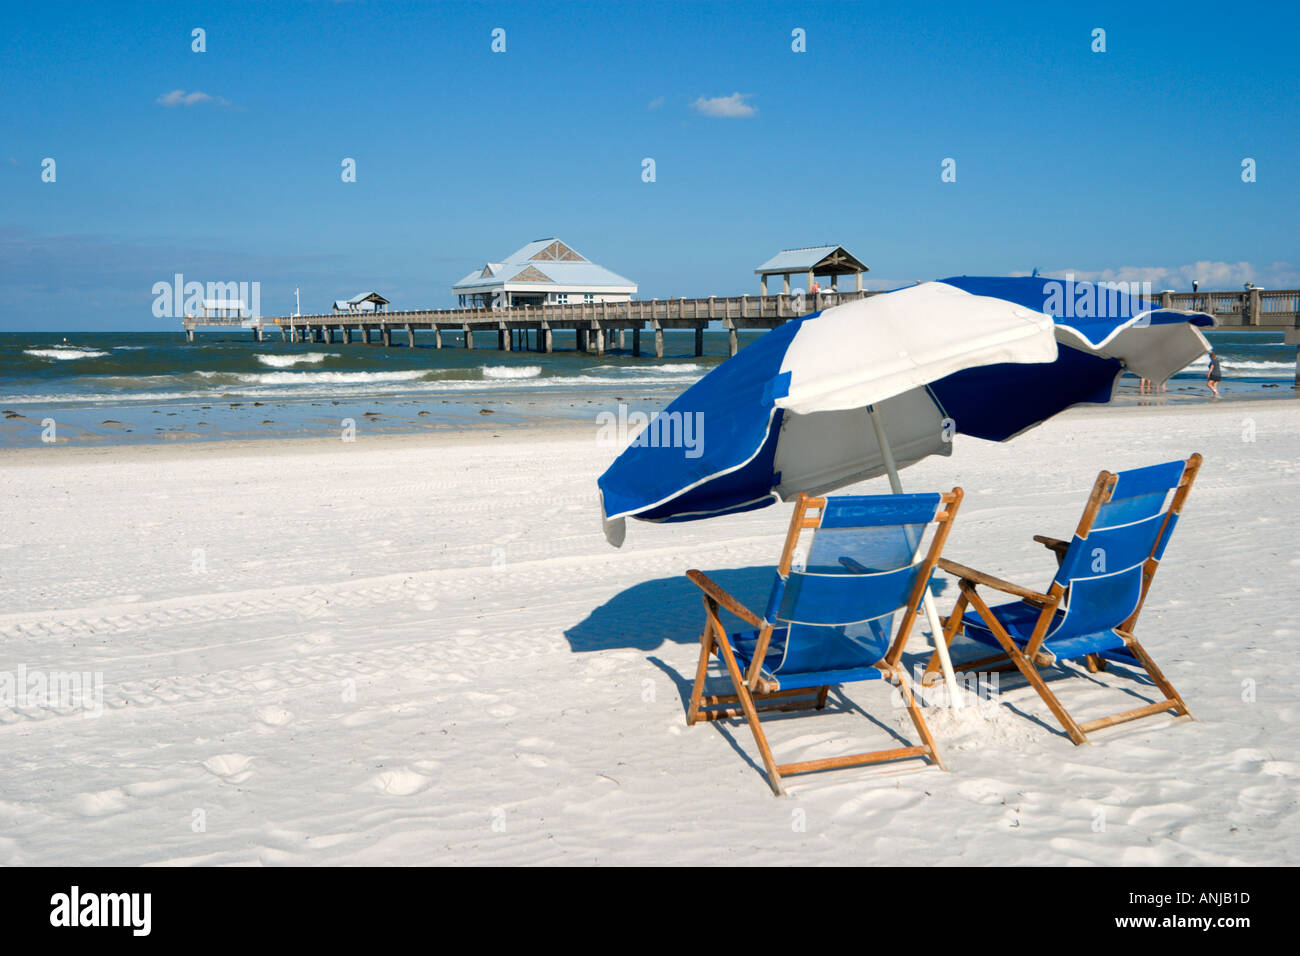 Pier 60 Clearwater Beach Gulf Coast Florida USA Banque D'Images